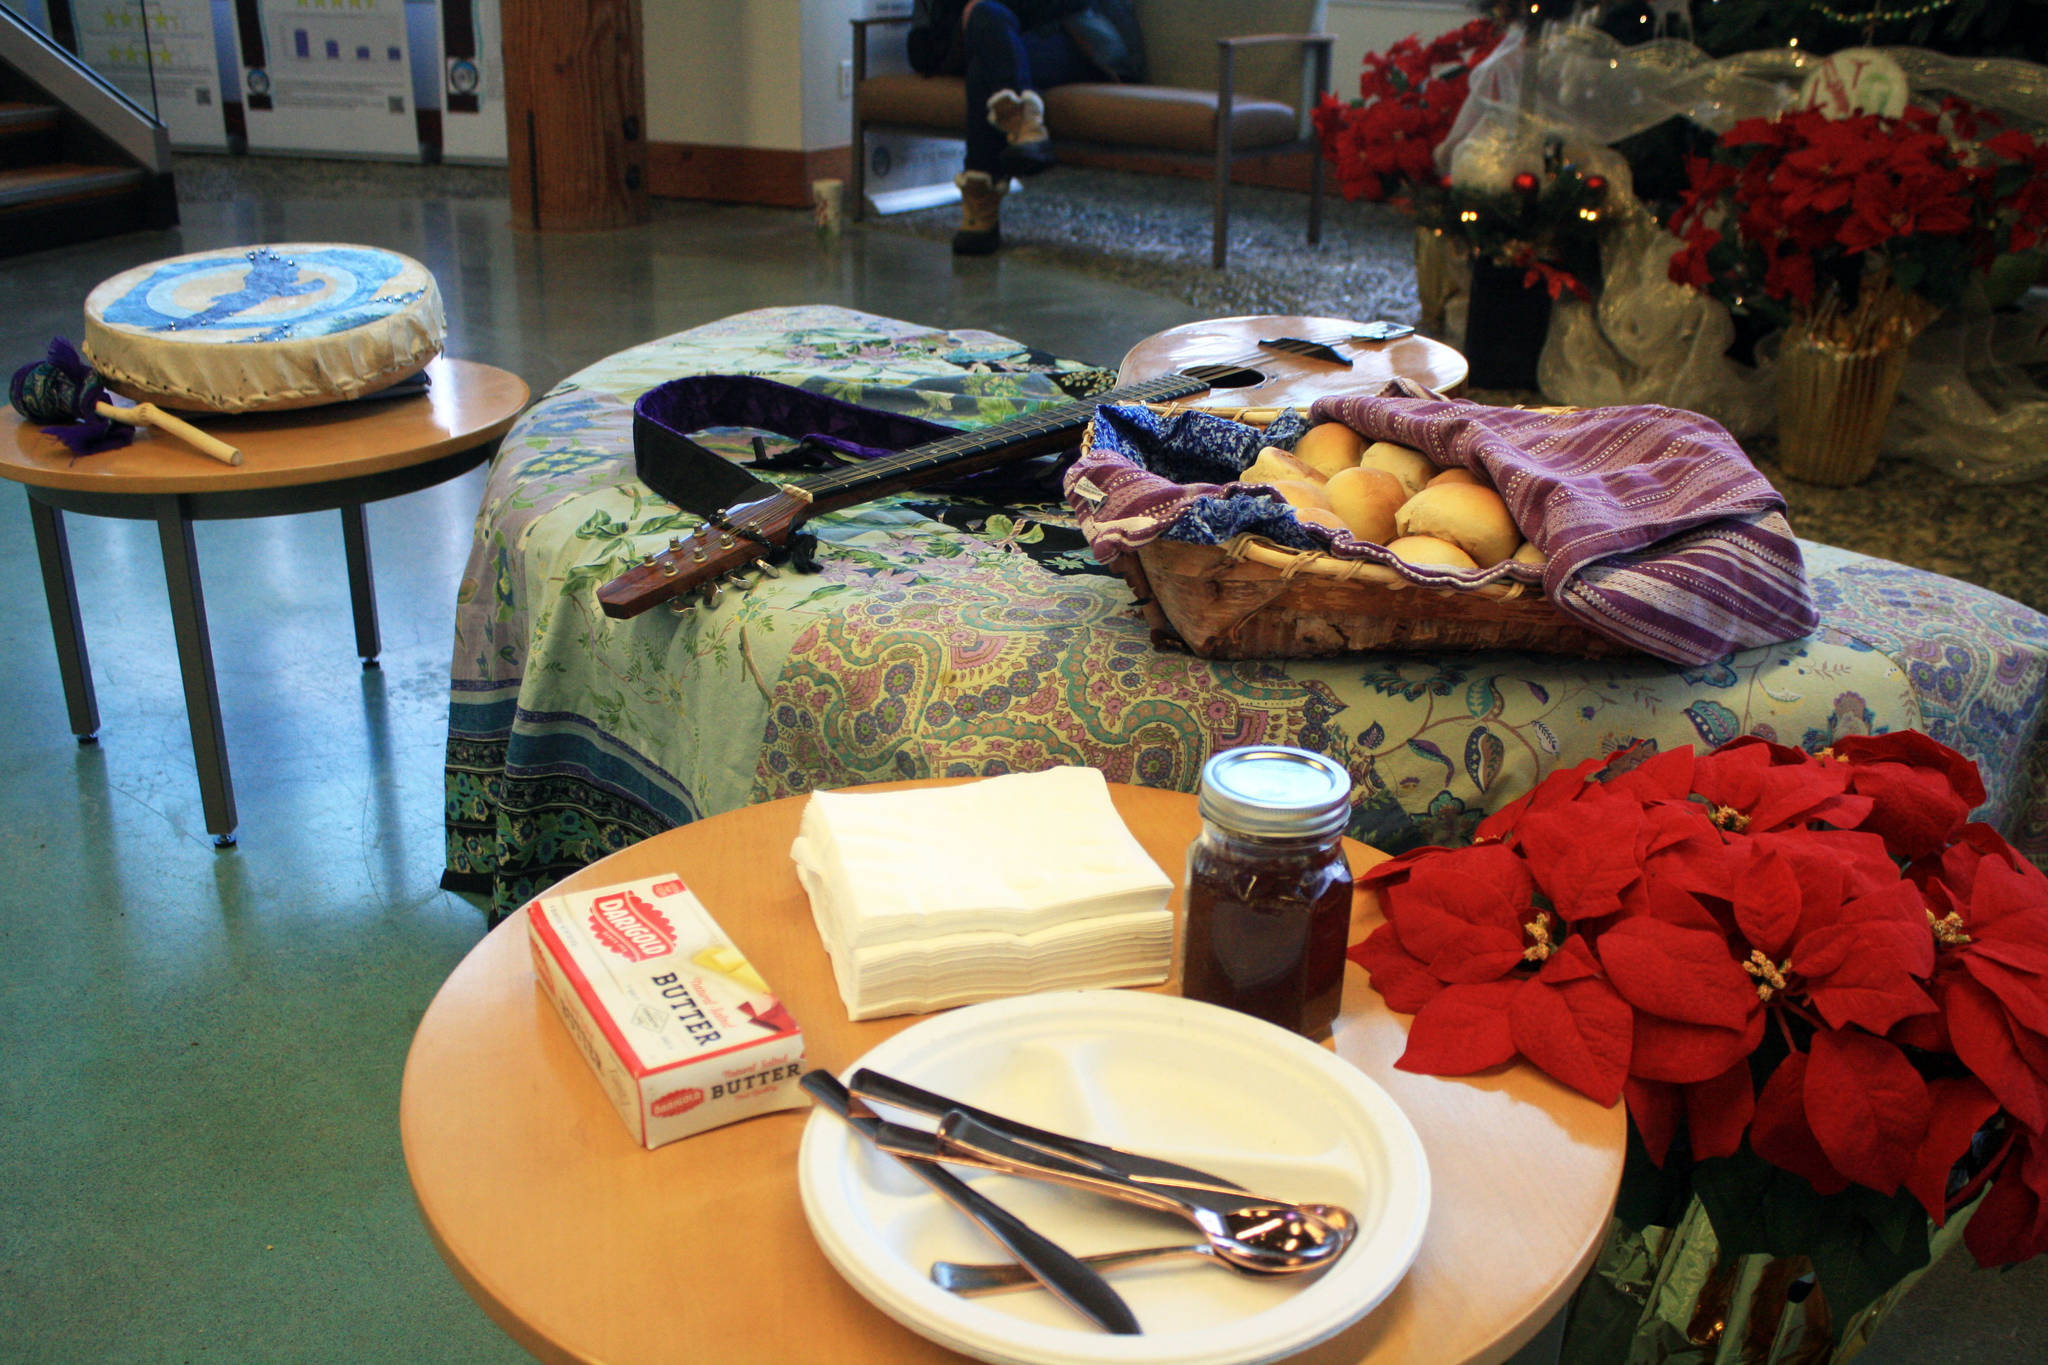 Homemade bread and jelly are provided to the community at a Dec. 21 winter solstice performance at Dena’ina Wellness Center in downtown Kenai. (Photo by Erin Thompson/Peninsula Clarion)